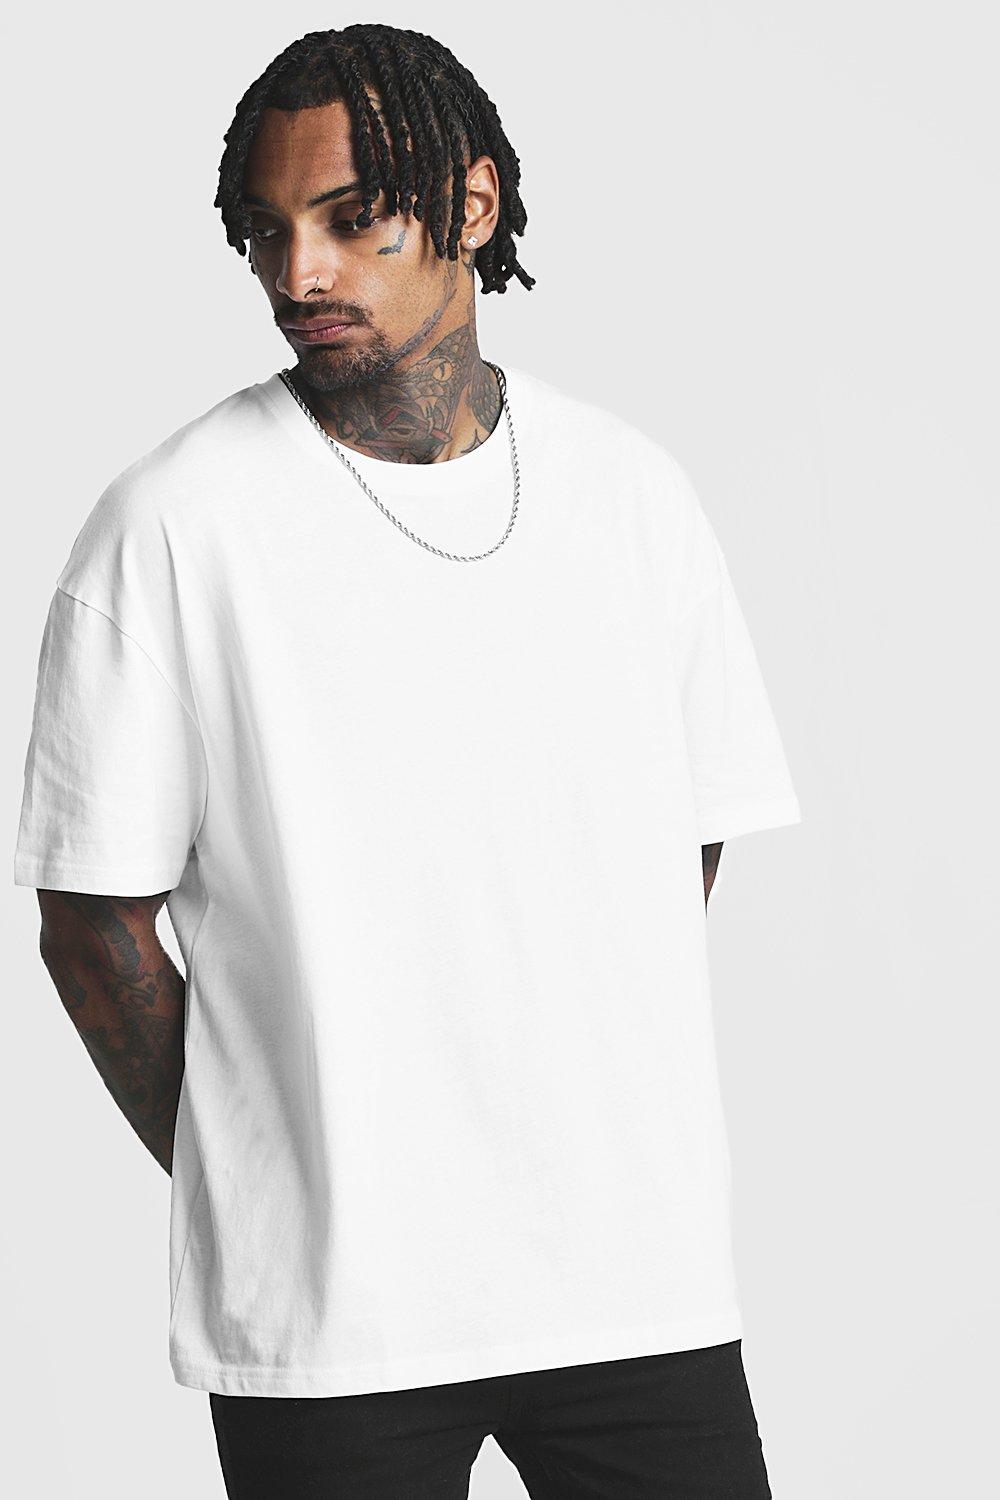 boohooMAN Oversized Extended Neck T-Shirt - White - Size S